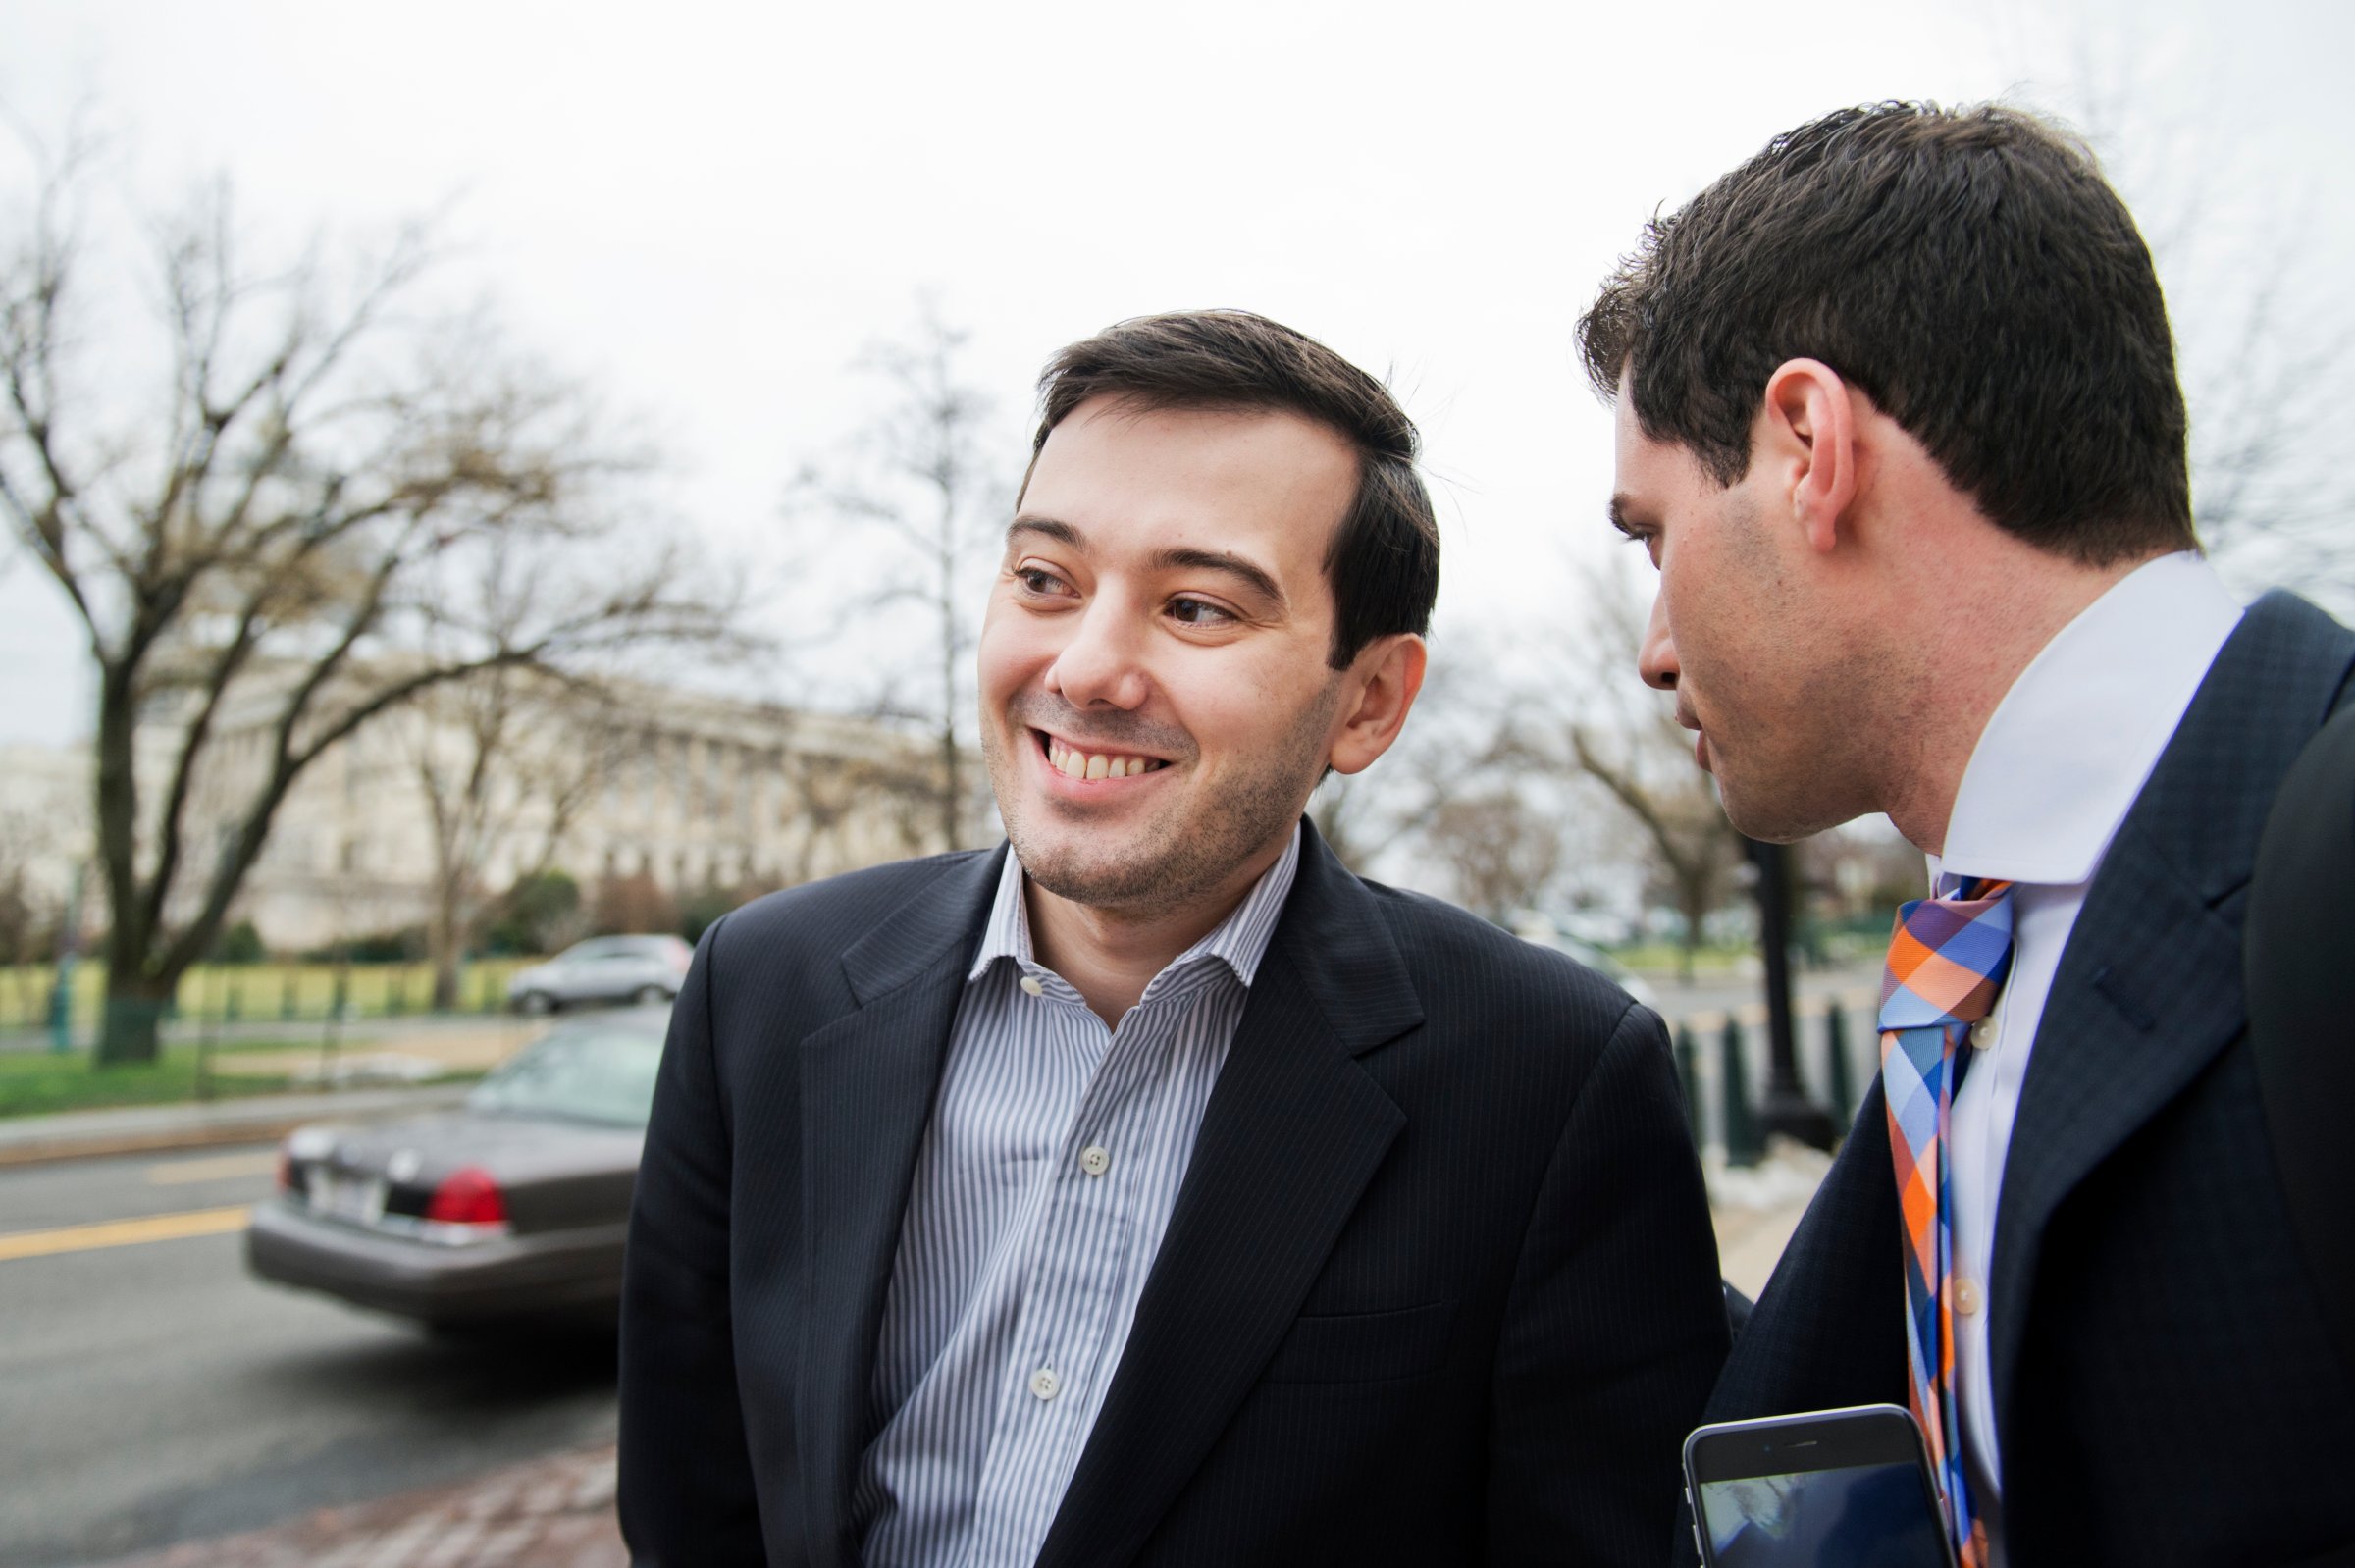 UNITED STATES - FEBRUARY 04: Martin Shkreli, center, former CEO Turing Pharmaceuticals, leaves a House Oversight and Government Reform Committee in Rayburn Building on "methods and reasoning behind recent drug price increases," after invoking his Fifth Amendment right against self-incrimination, February 04, 2016. Turing had raised the price of Daraprim, a drug used by AIDS and cancer patients, from $13.50 to $750 a pill. His attorney Benjamin Brafman appears second from right. (Photo By Tom Williams/CQ Roll Call)